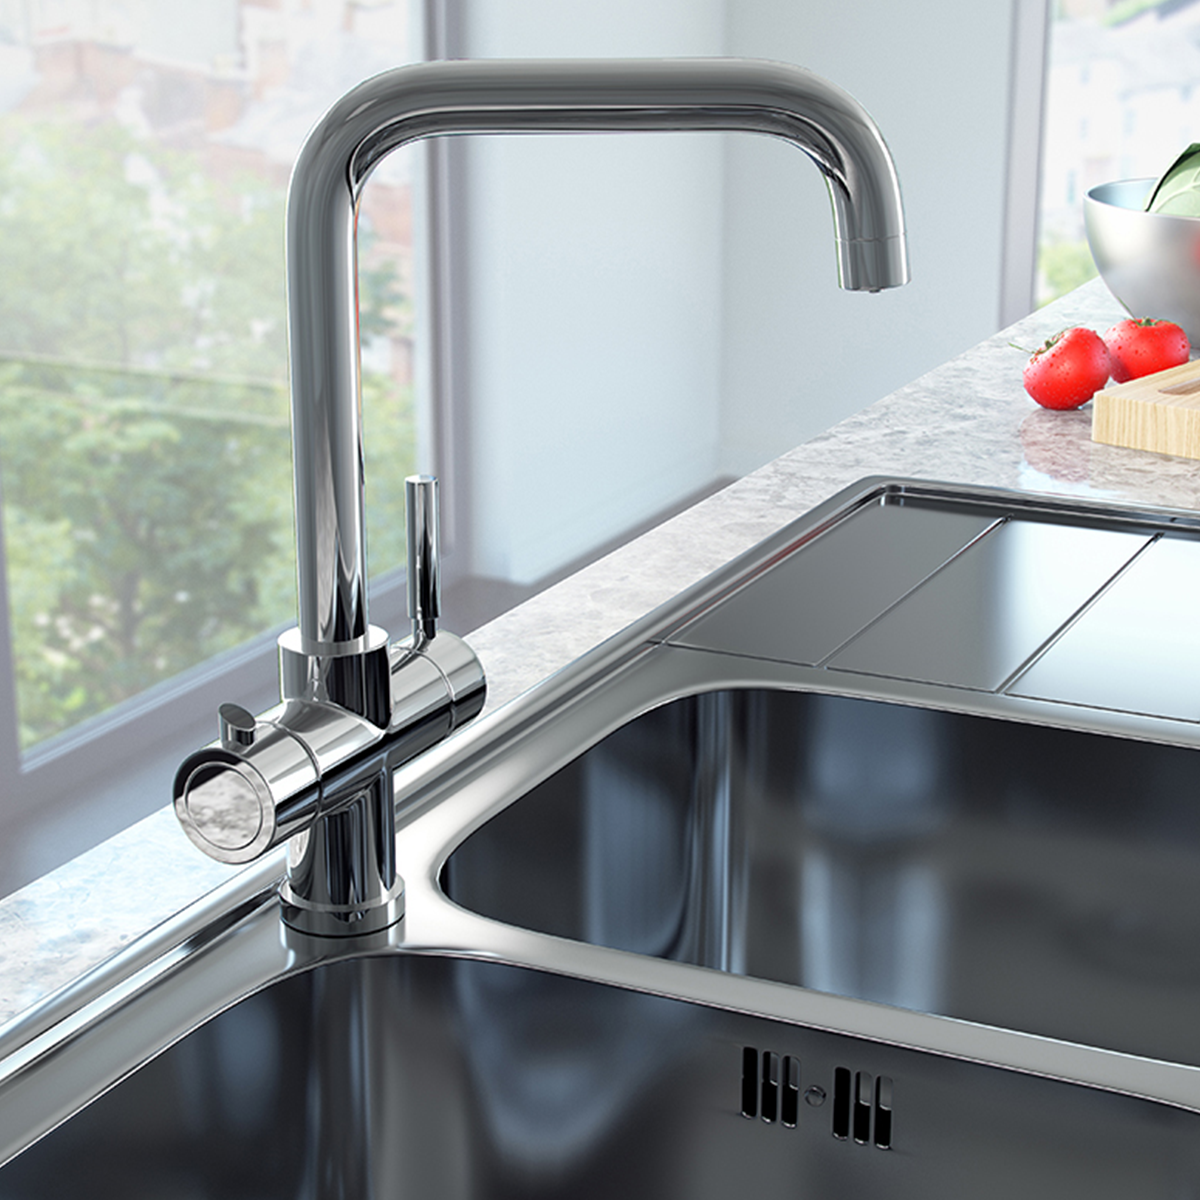 Eliseo Ricci Instant Boiling Water Kitchen Tap - Chrome (12607)